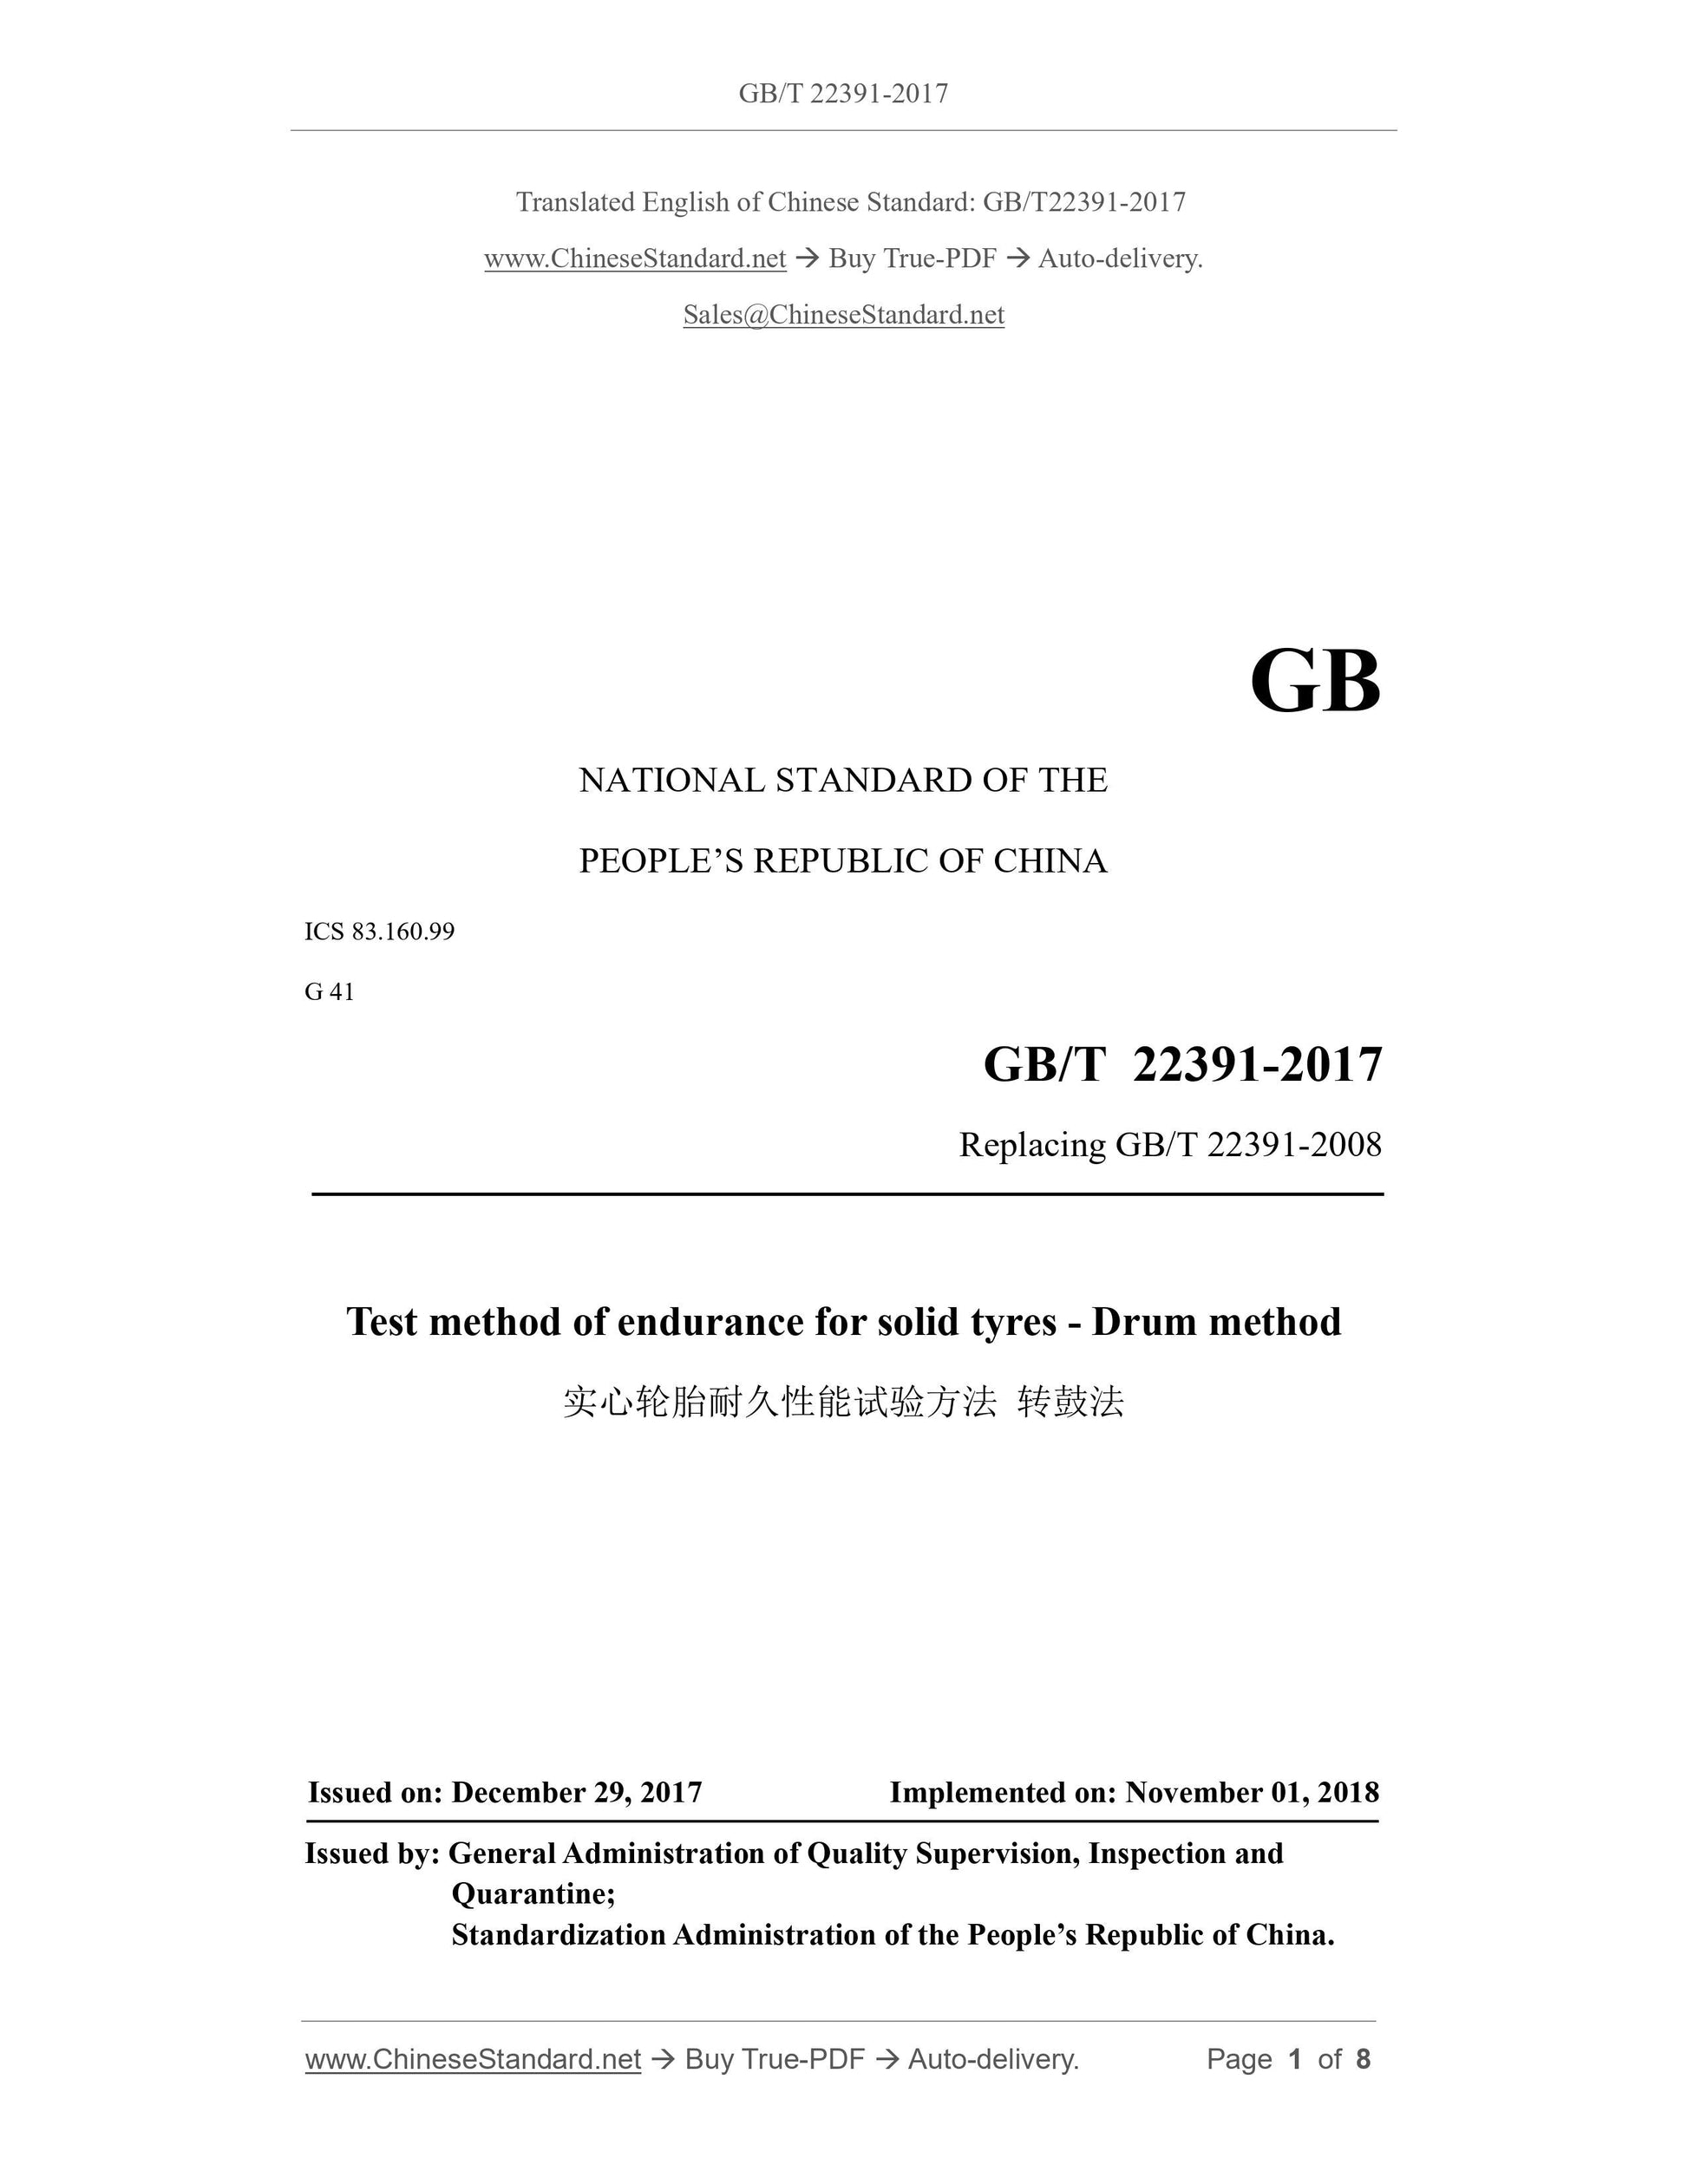 GB/T 22391-2017 Page 1